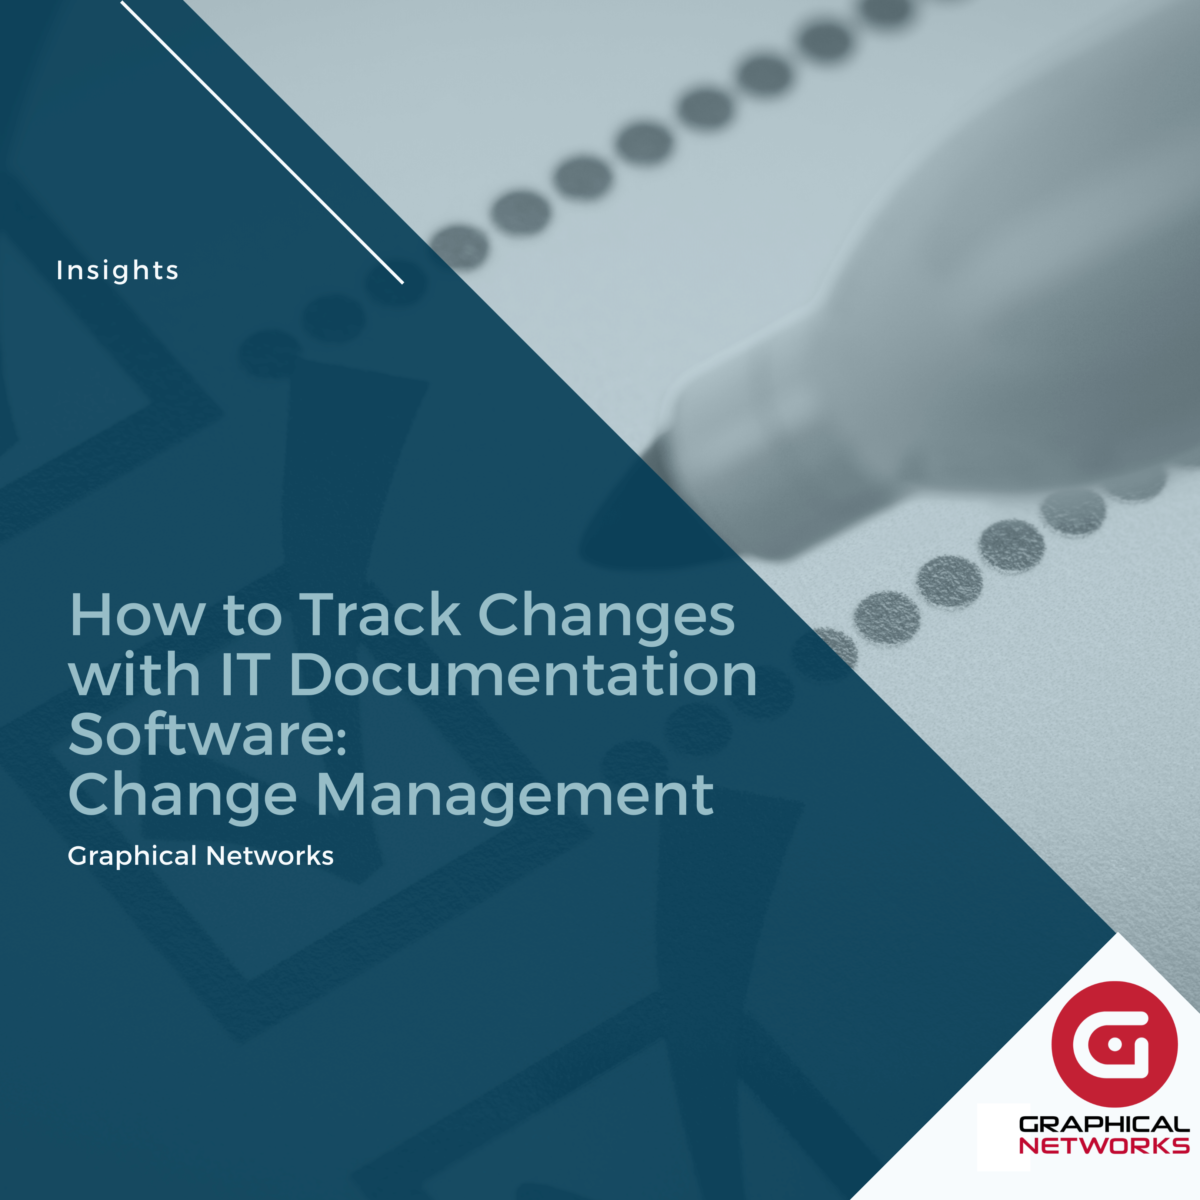 How to Track Changes with IT Documentation Software: Change Management